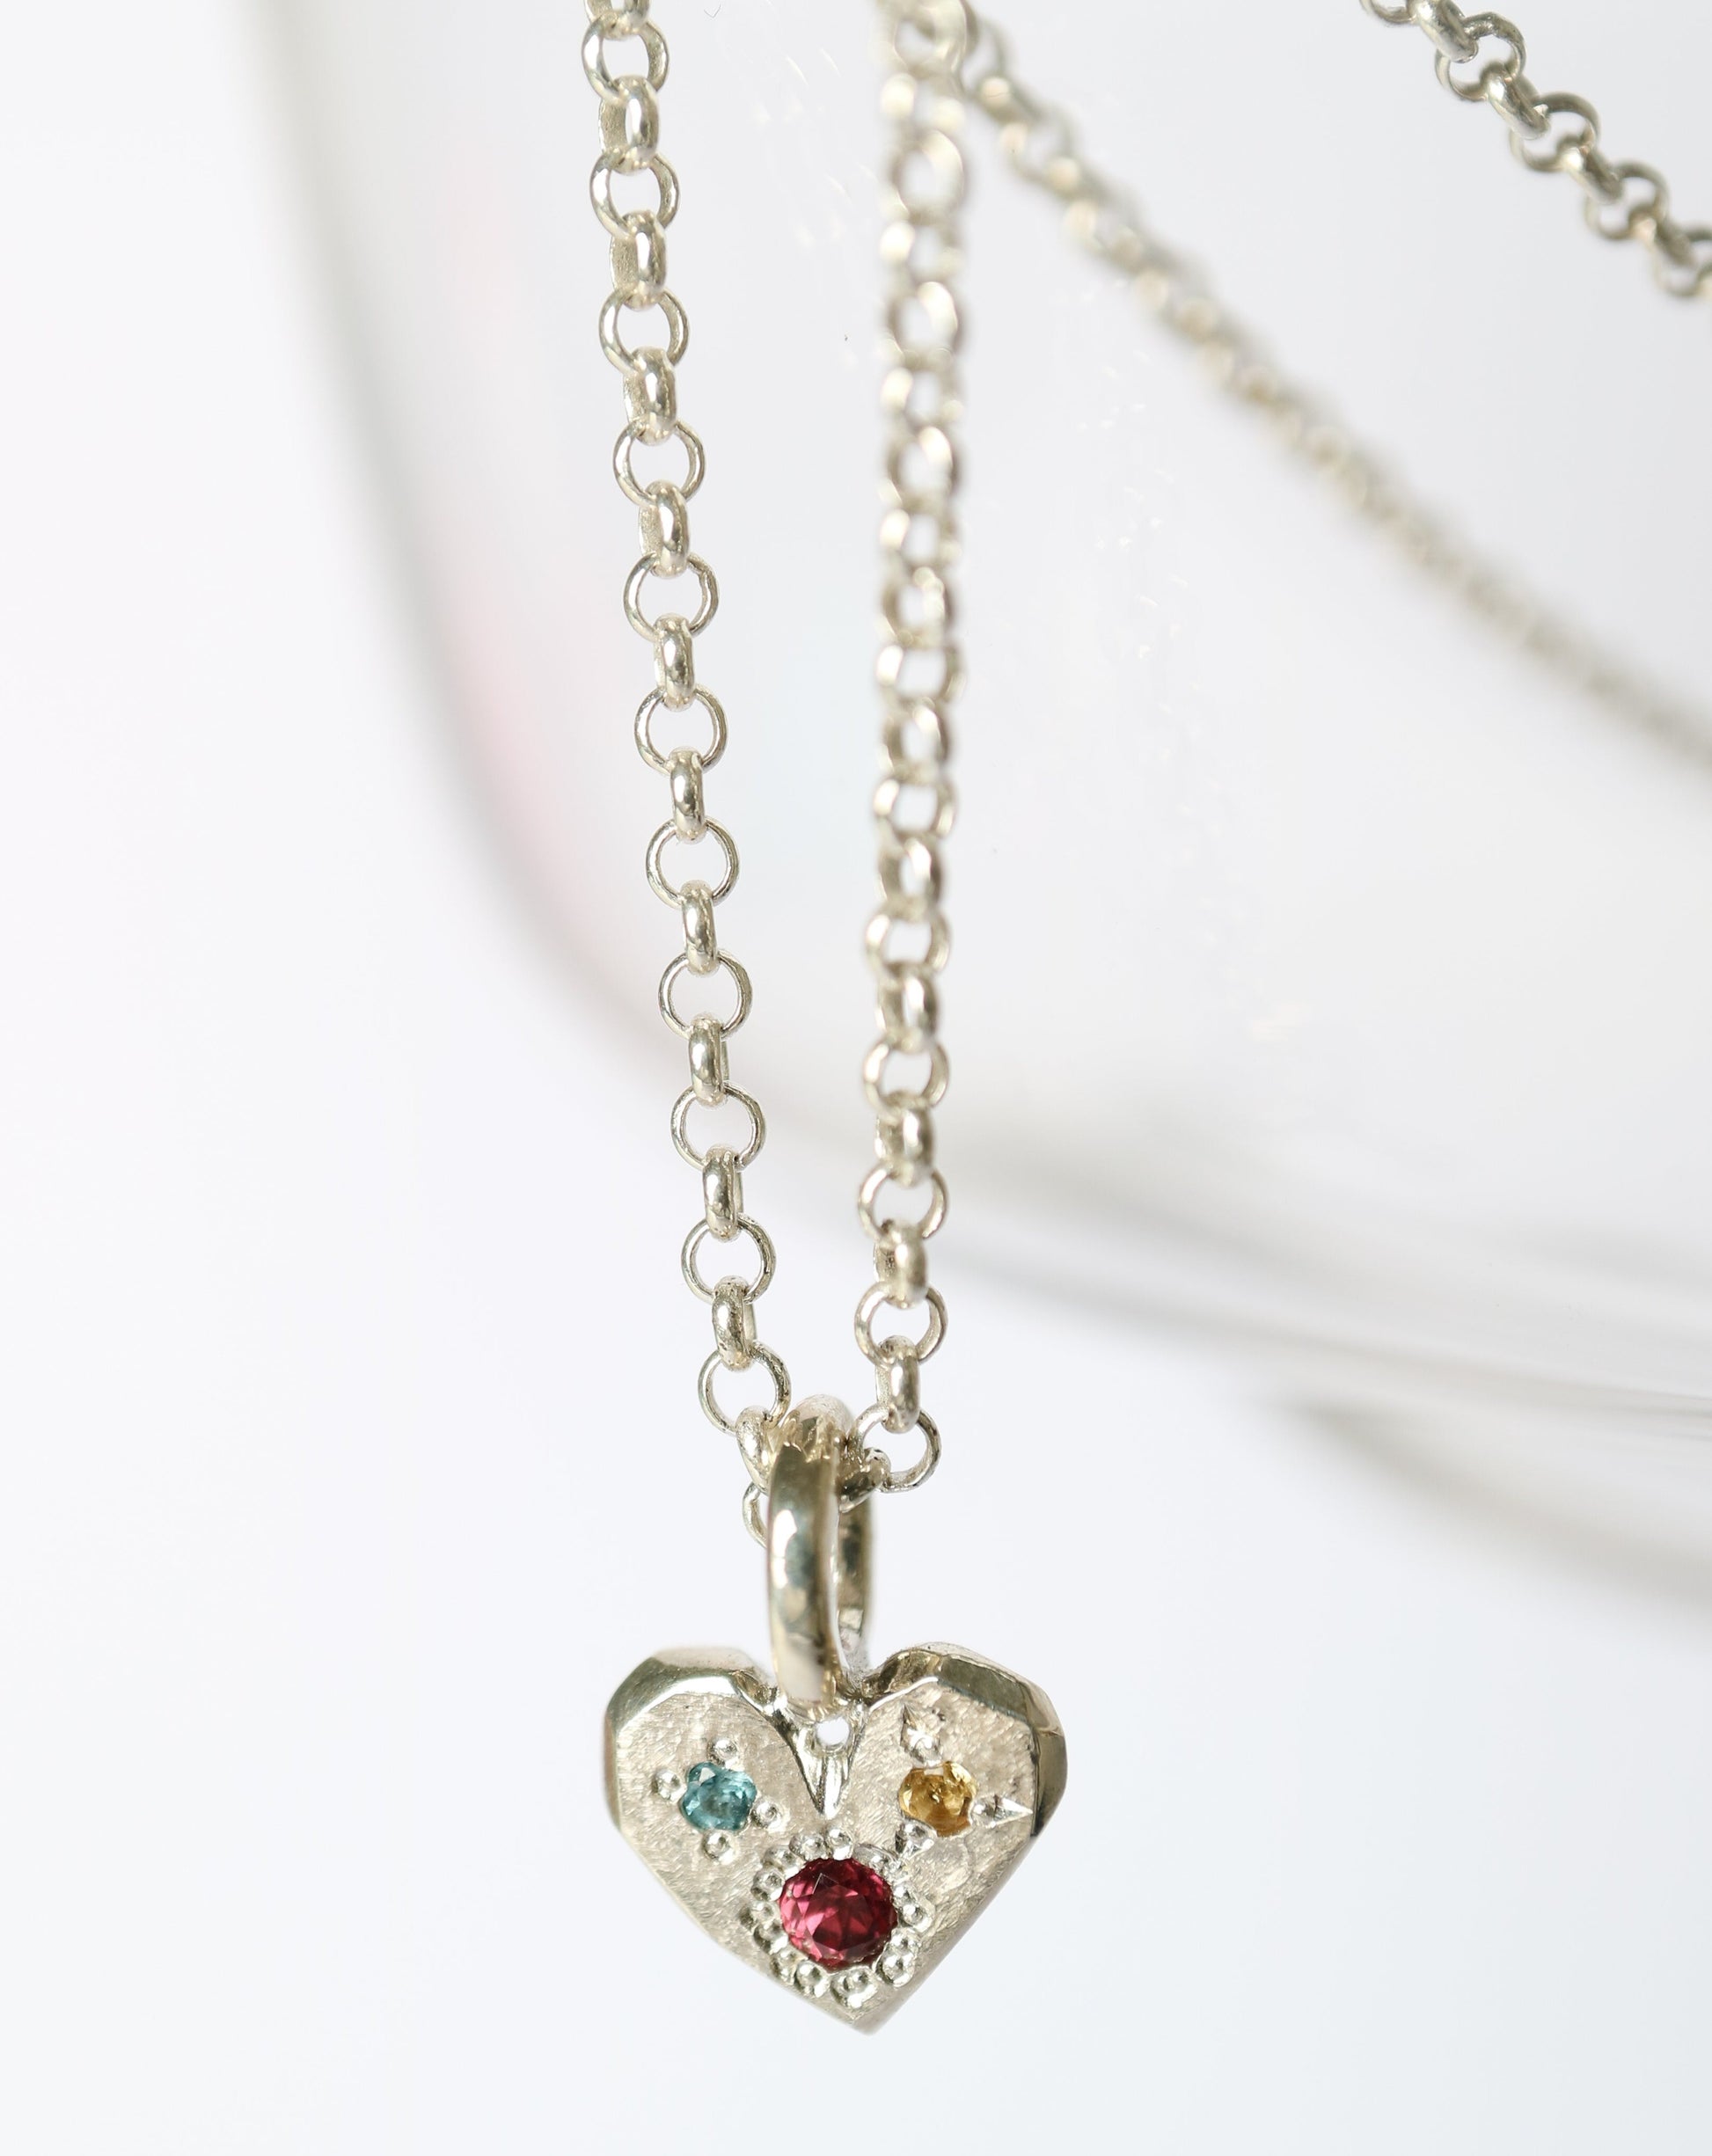 Zadie Remarco Stargazer Mini Heart Charm in silver with natural colourful gemstones